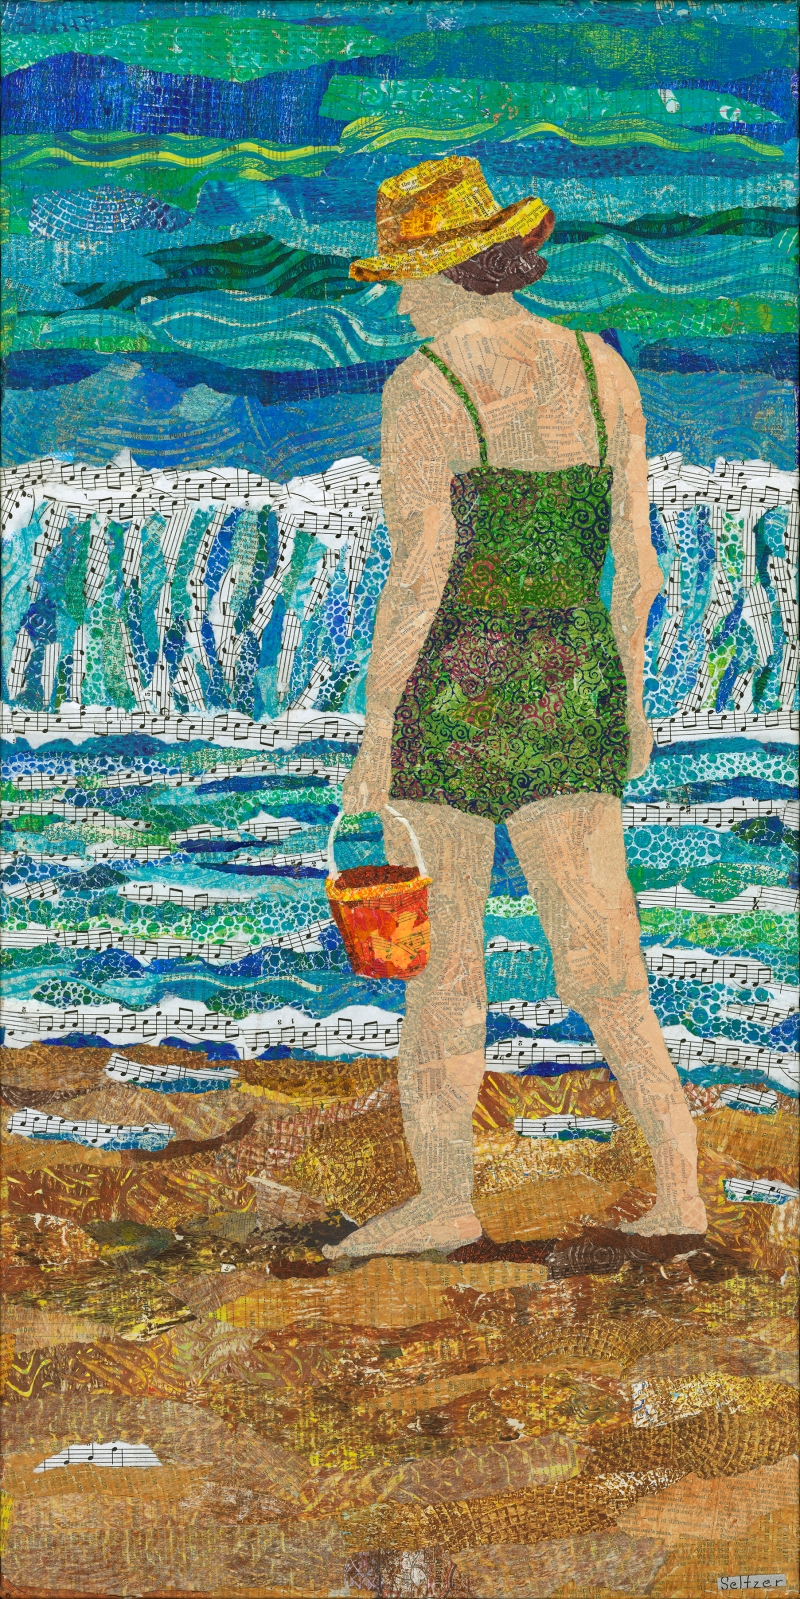 Woman collecting shells along the shore line